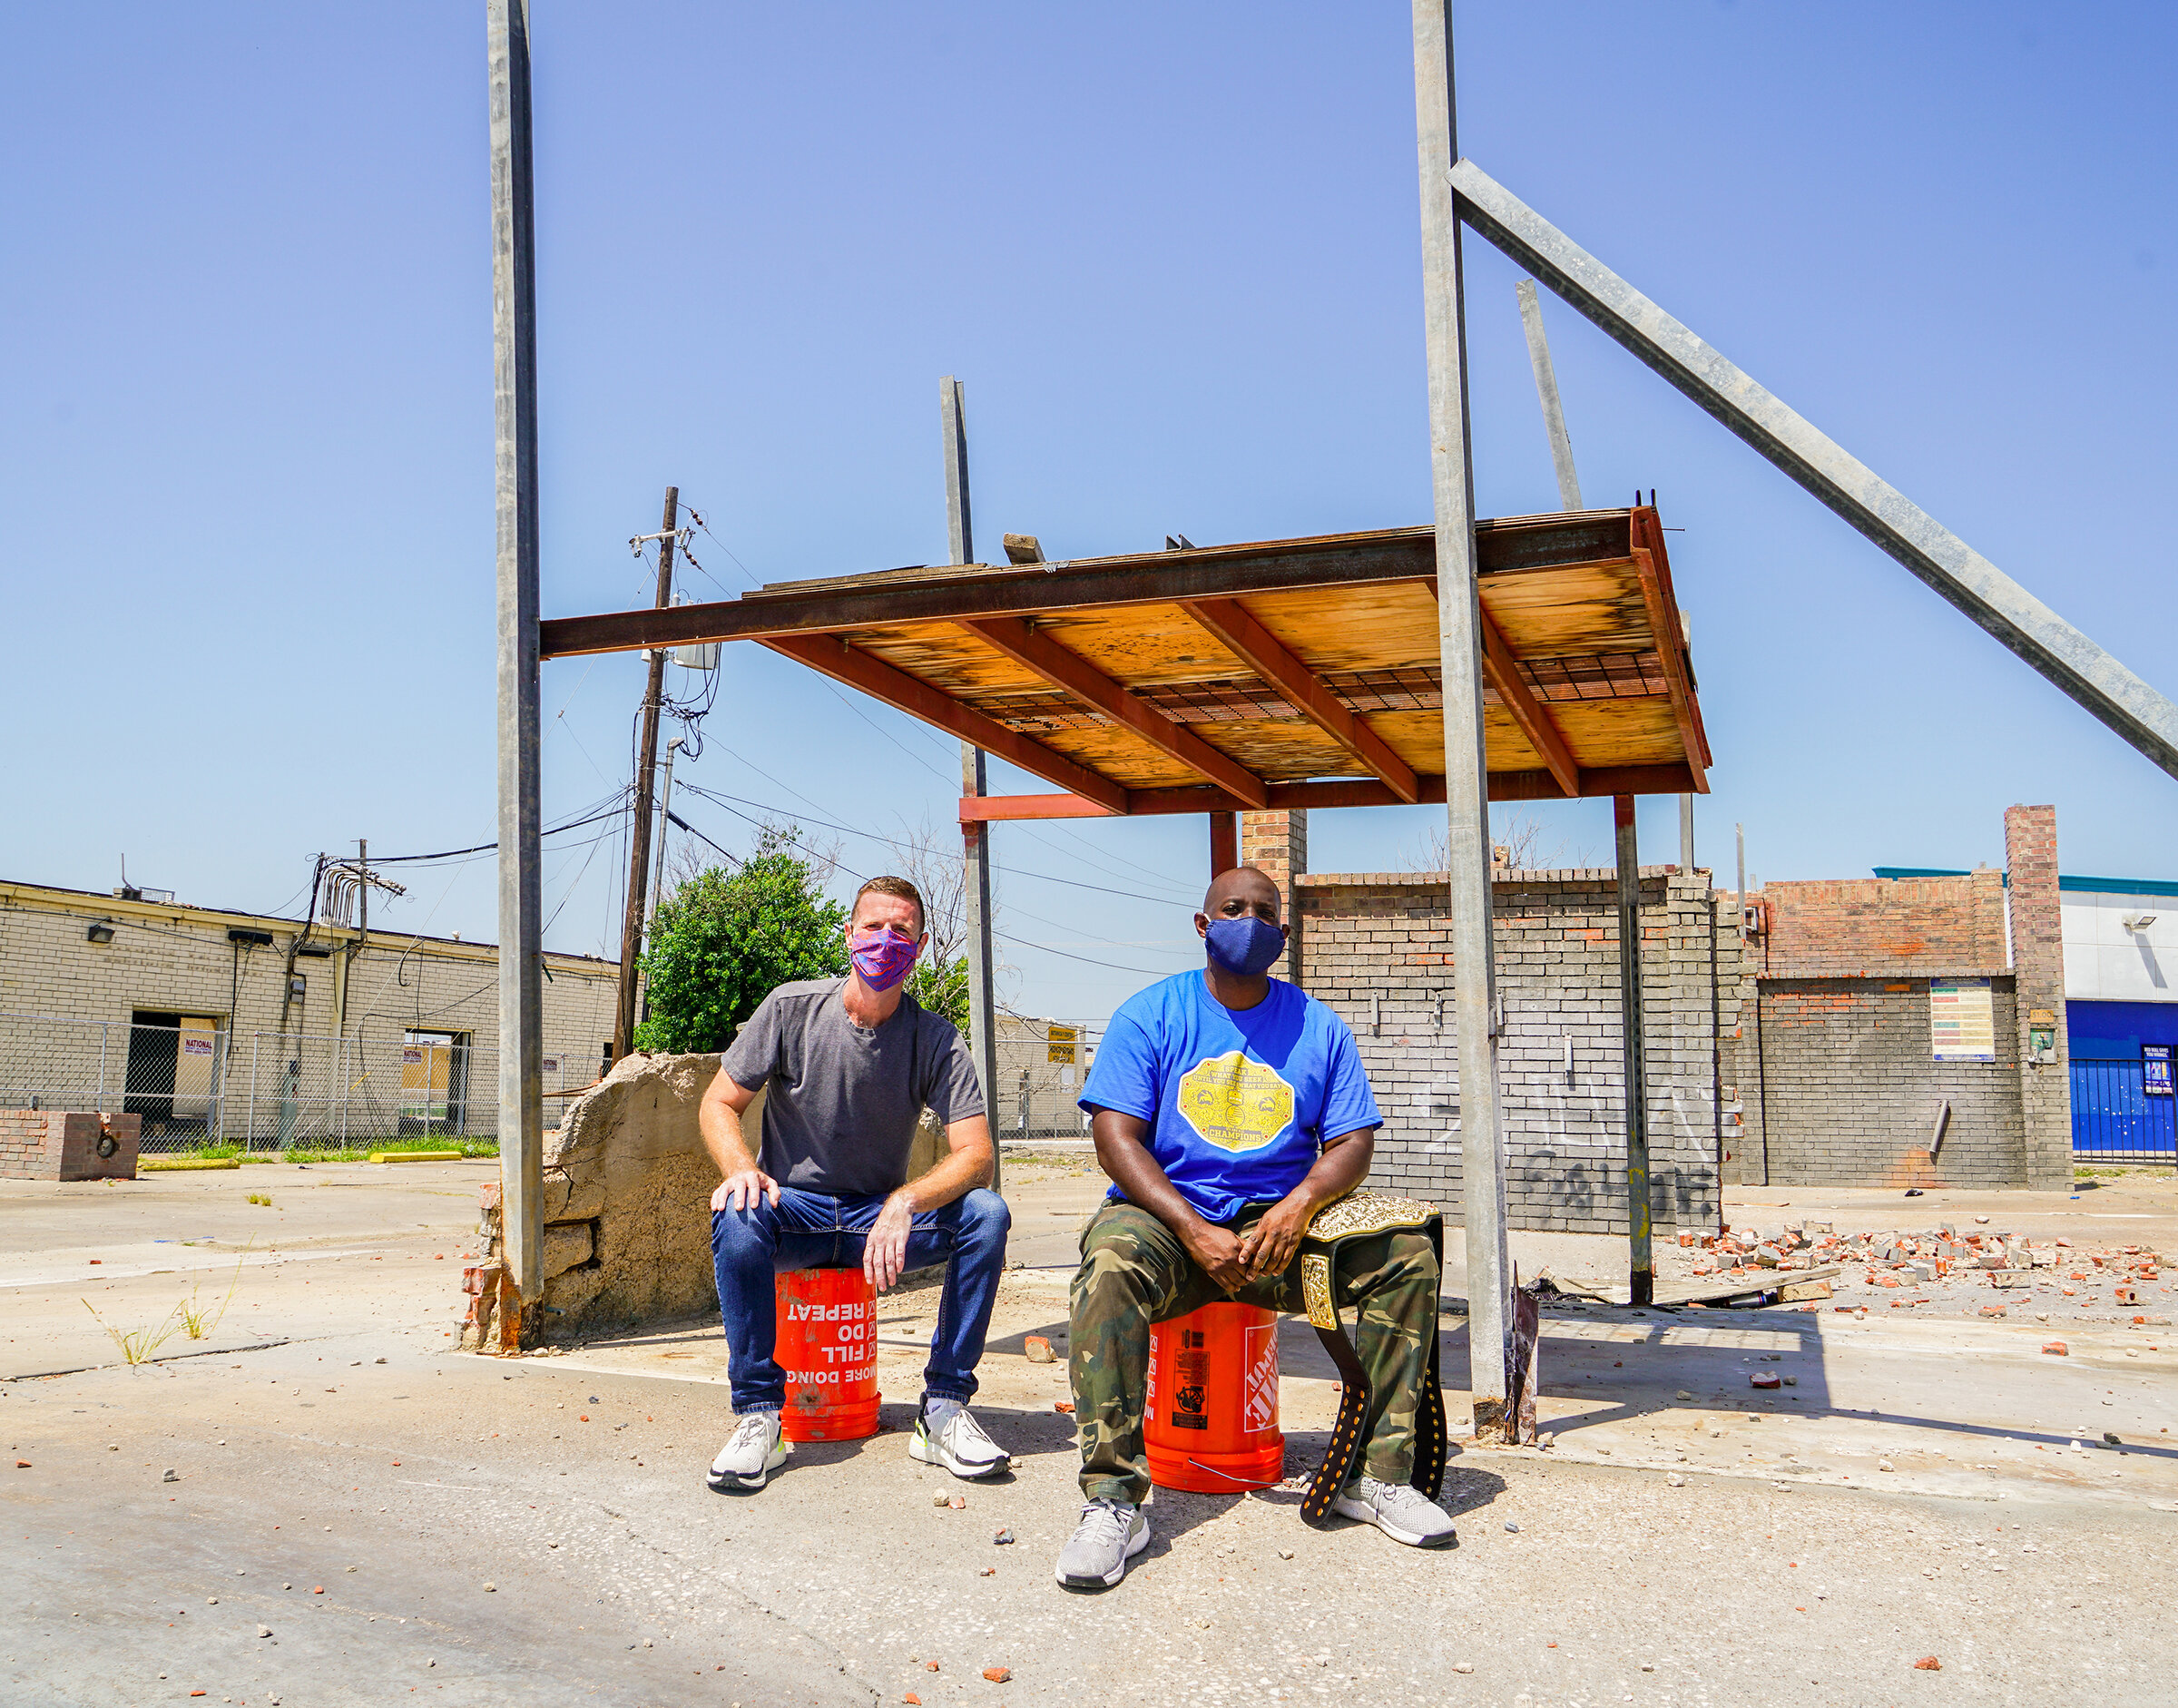 (L to R) Jordan with Eric at a local car wash destroyed by an EF3 tornado in October 2019, just blocks from Burnet Elementary.